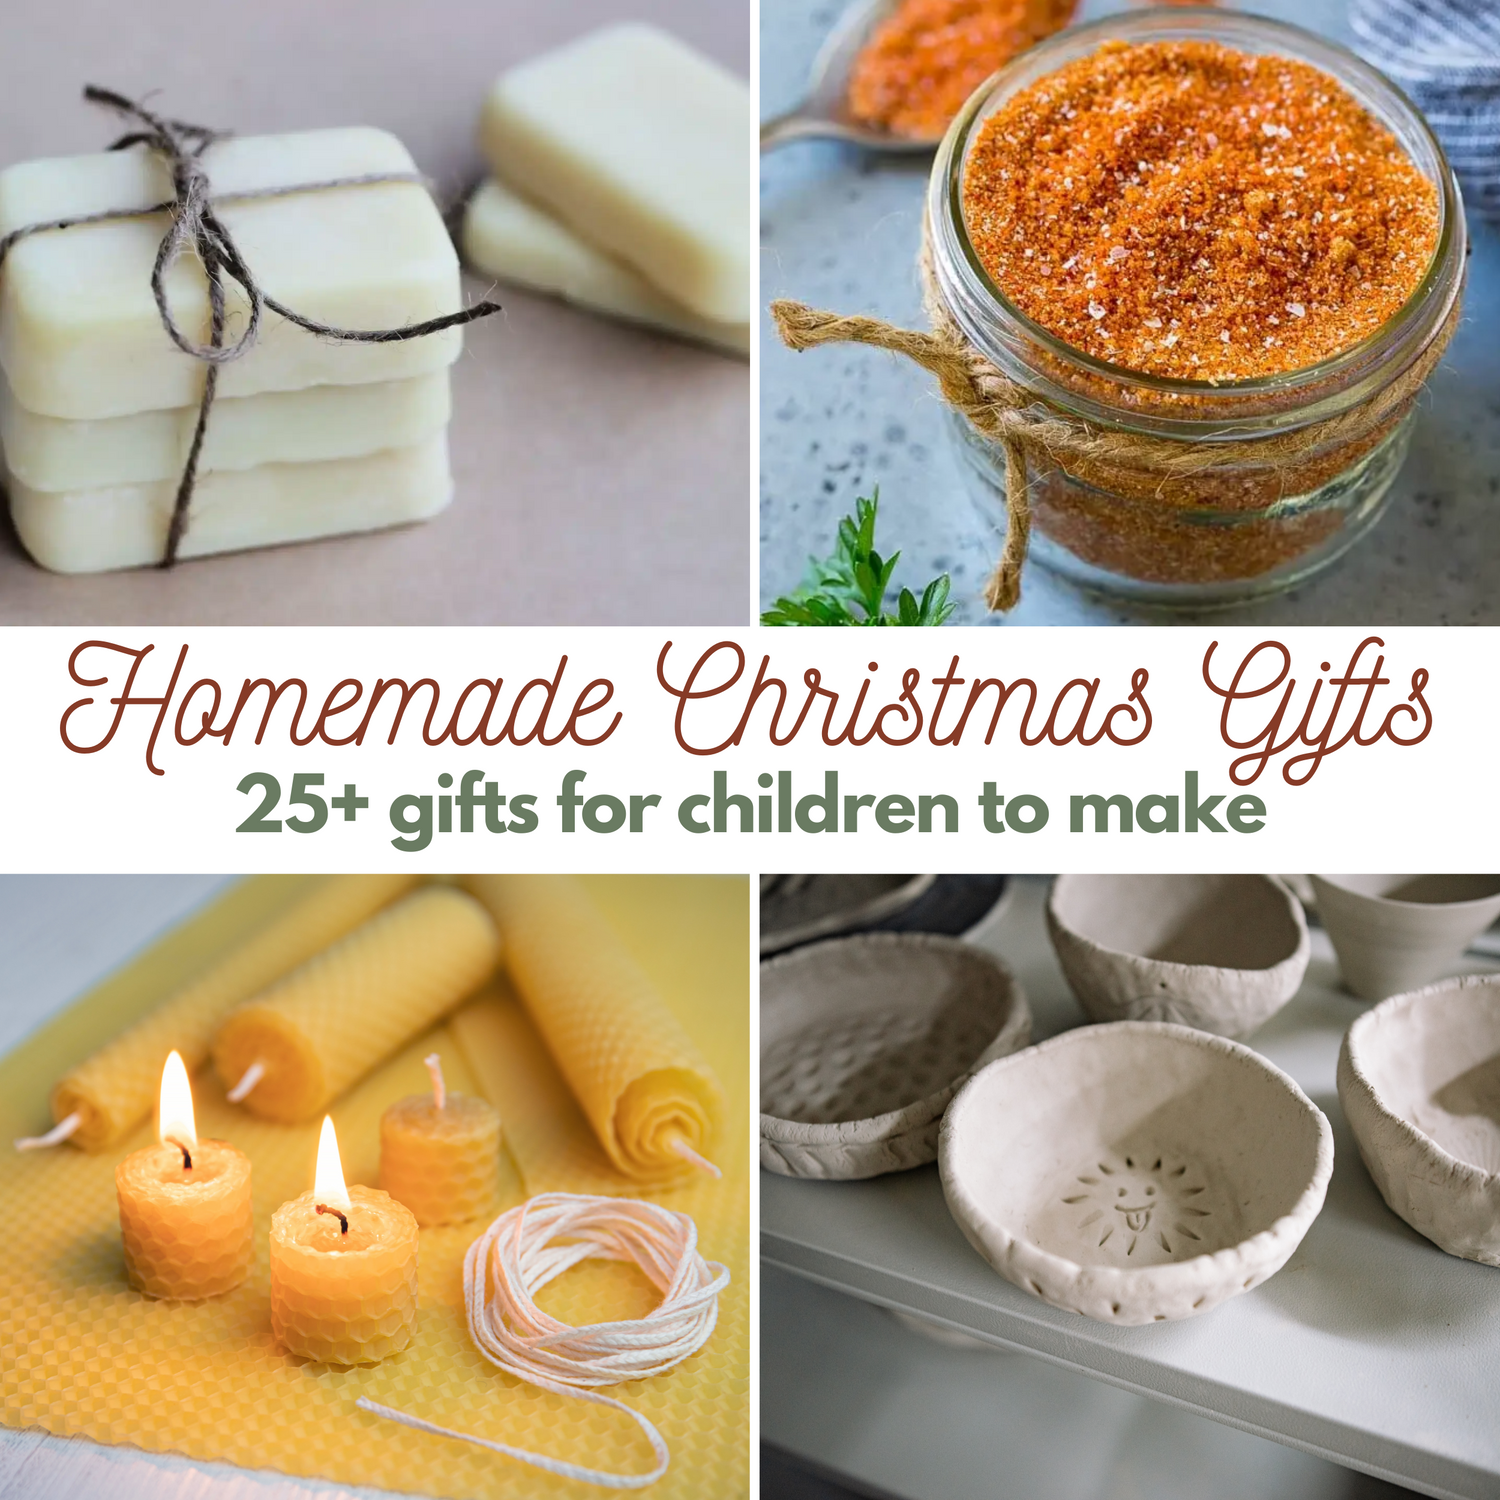 Homemade Christmas Gifts: 25 Gifts for Children to Make